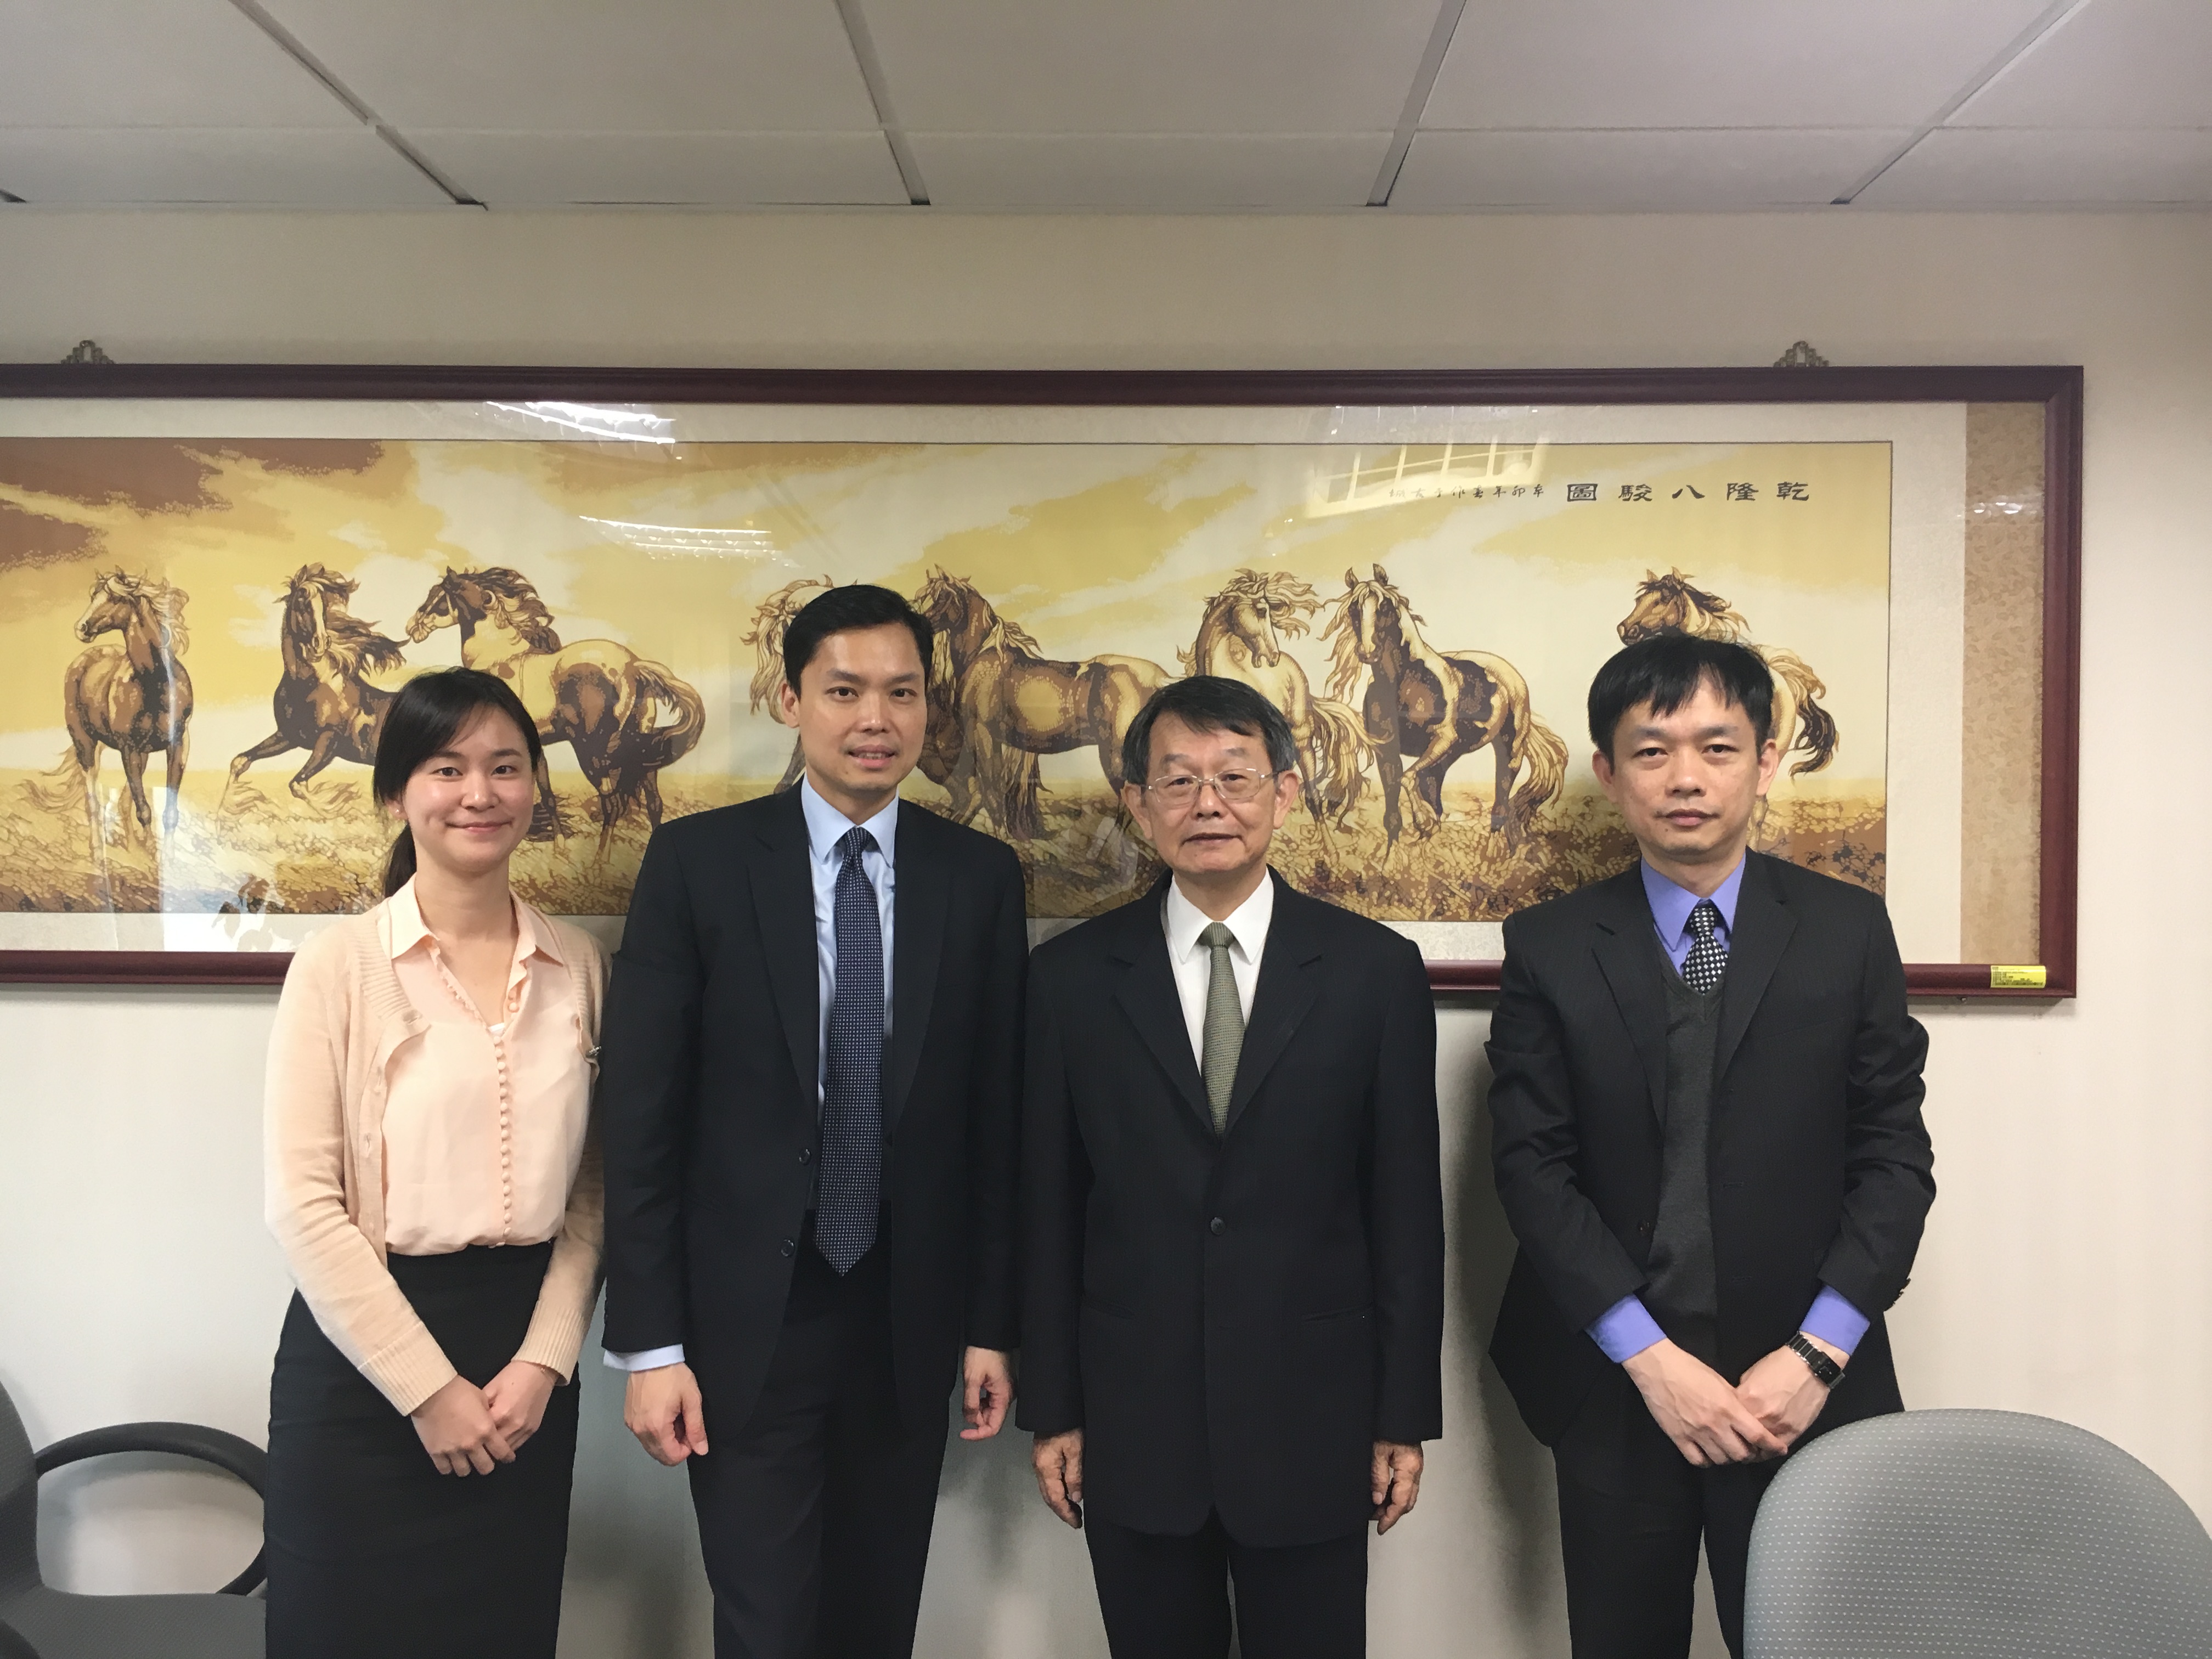 David Lum, Attaché, IRS Criminal Investigation, US Consulate Hong Kong, visited Department of International and Cross-Strait Legal Affairs, MOJ, to exchange views on mutual legal assistance, the mechanism of information exchange and interflow between Taiwan and USA on Feb. 19, 2019